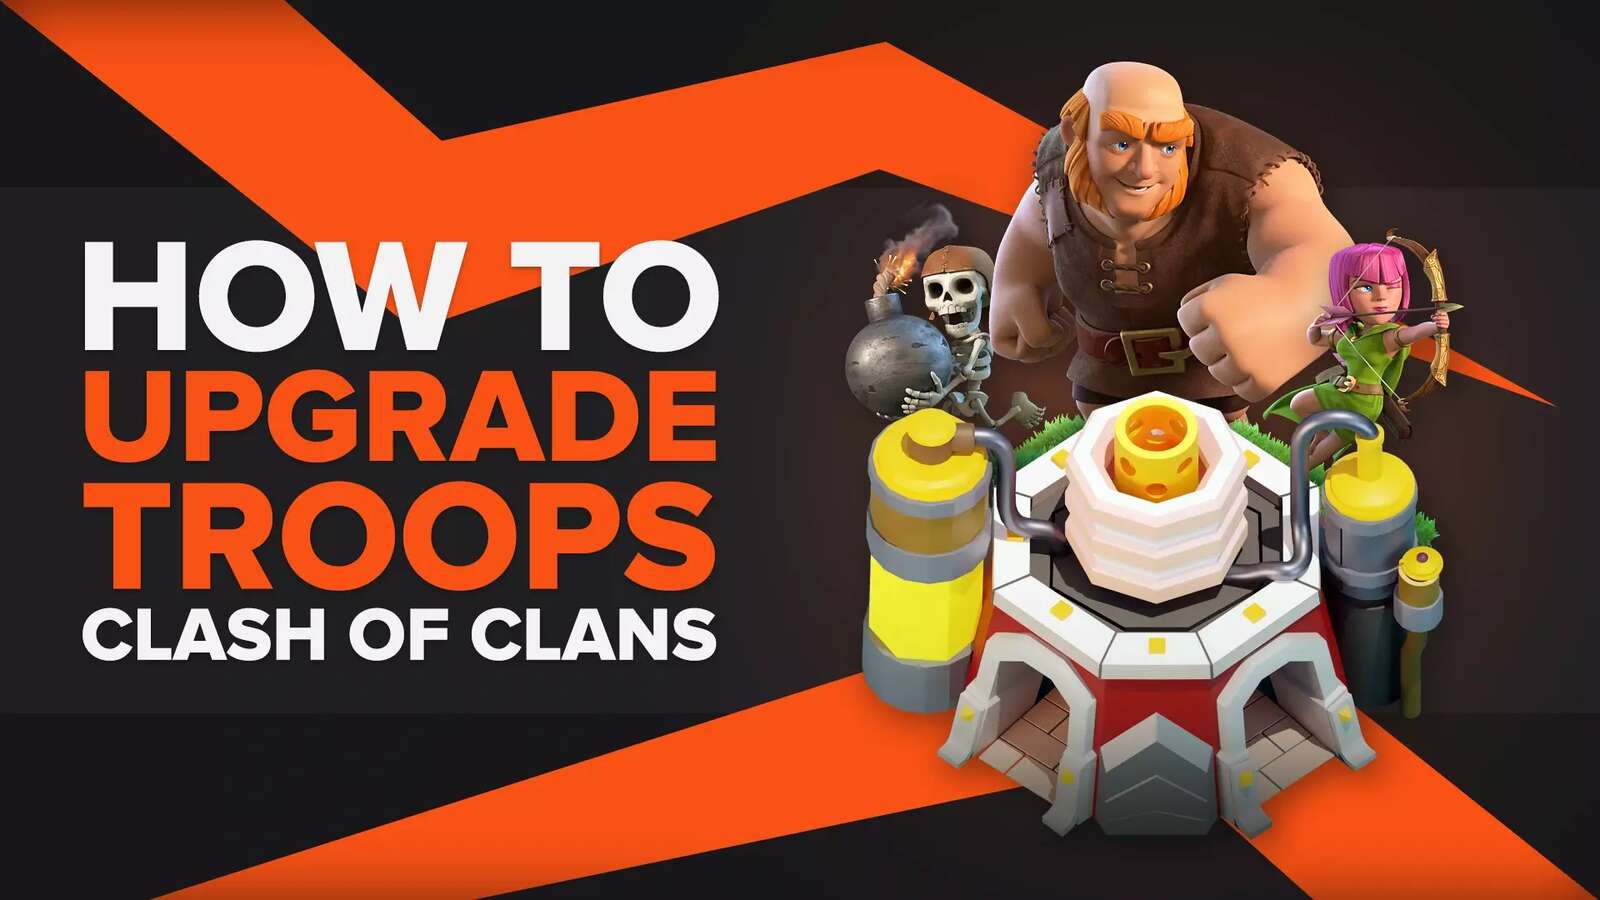 How To Upgrade Troops In Clash of Clans